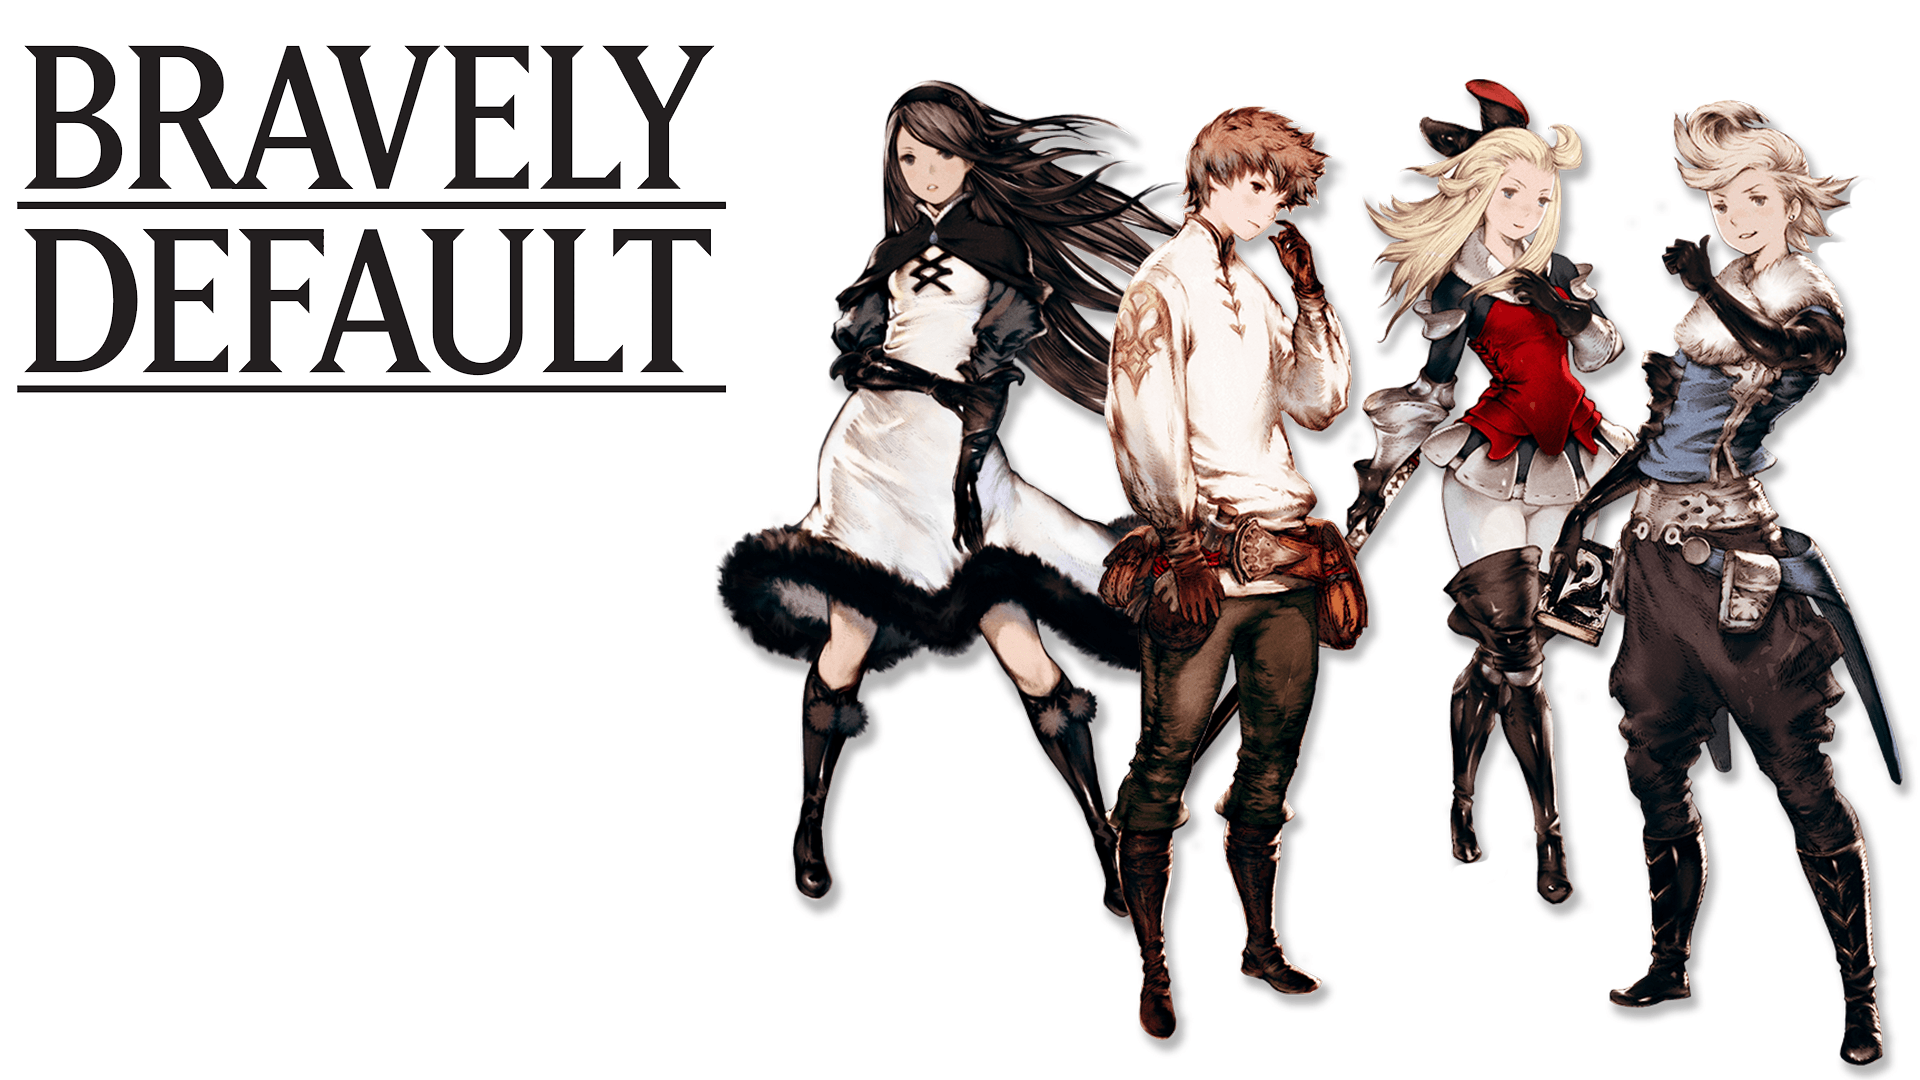 I made a simple Bravely Default wallpaper [1920x1080]